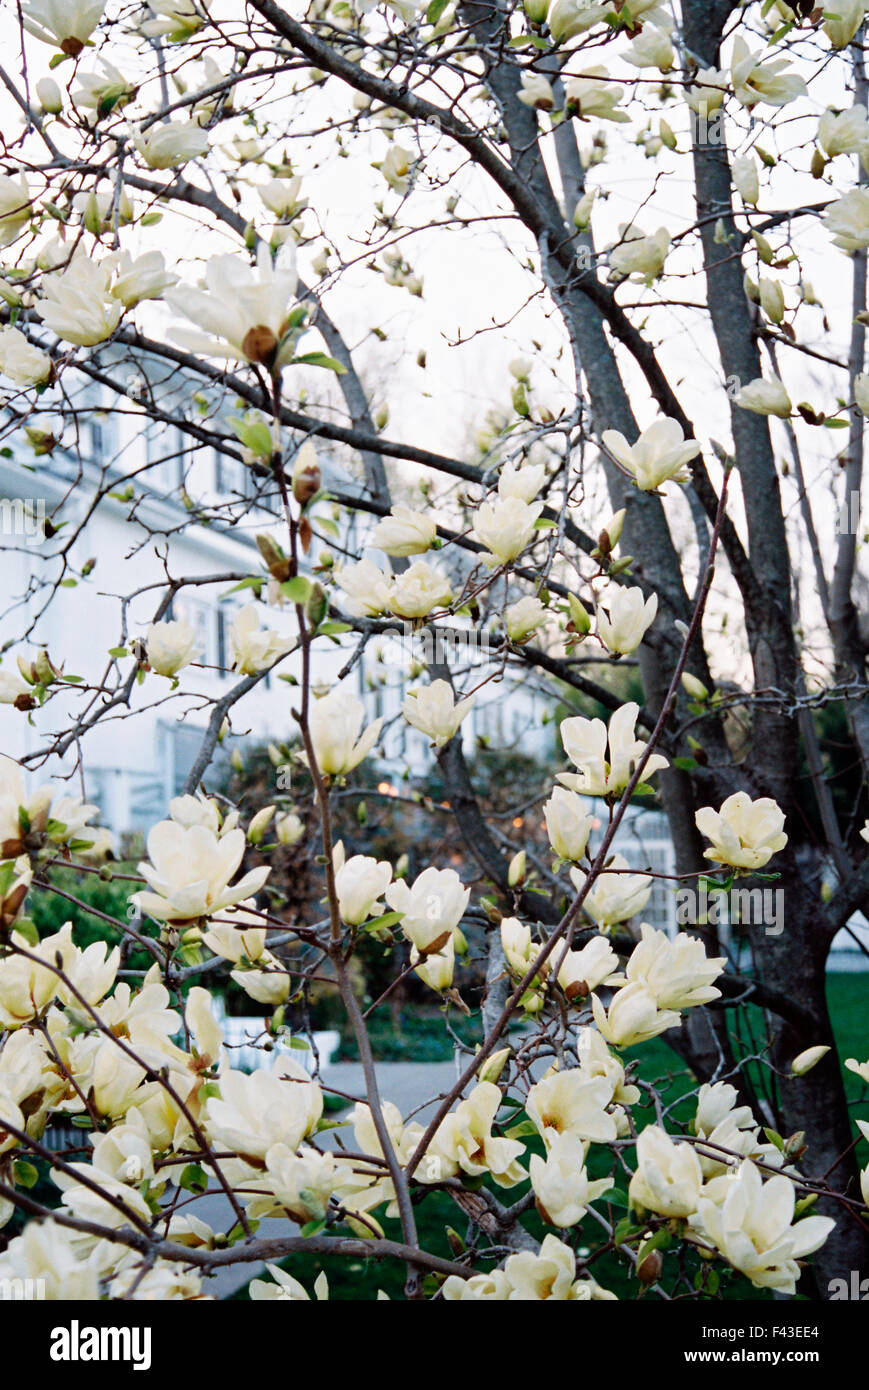 A magnolia tree with large creamy blossoms, flowering in a hotel garden. Stock Photo